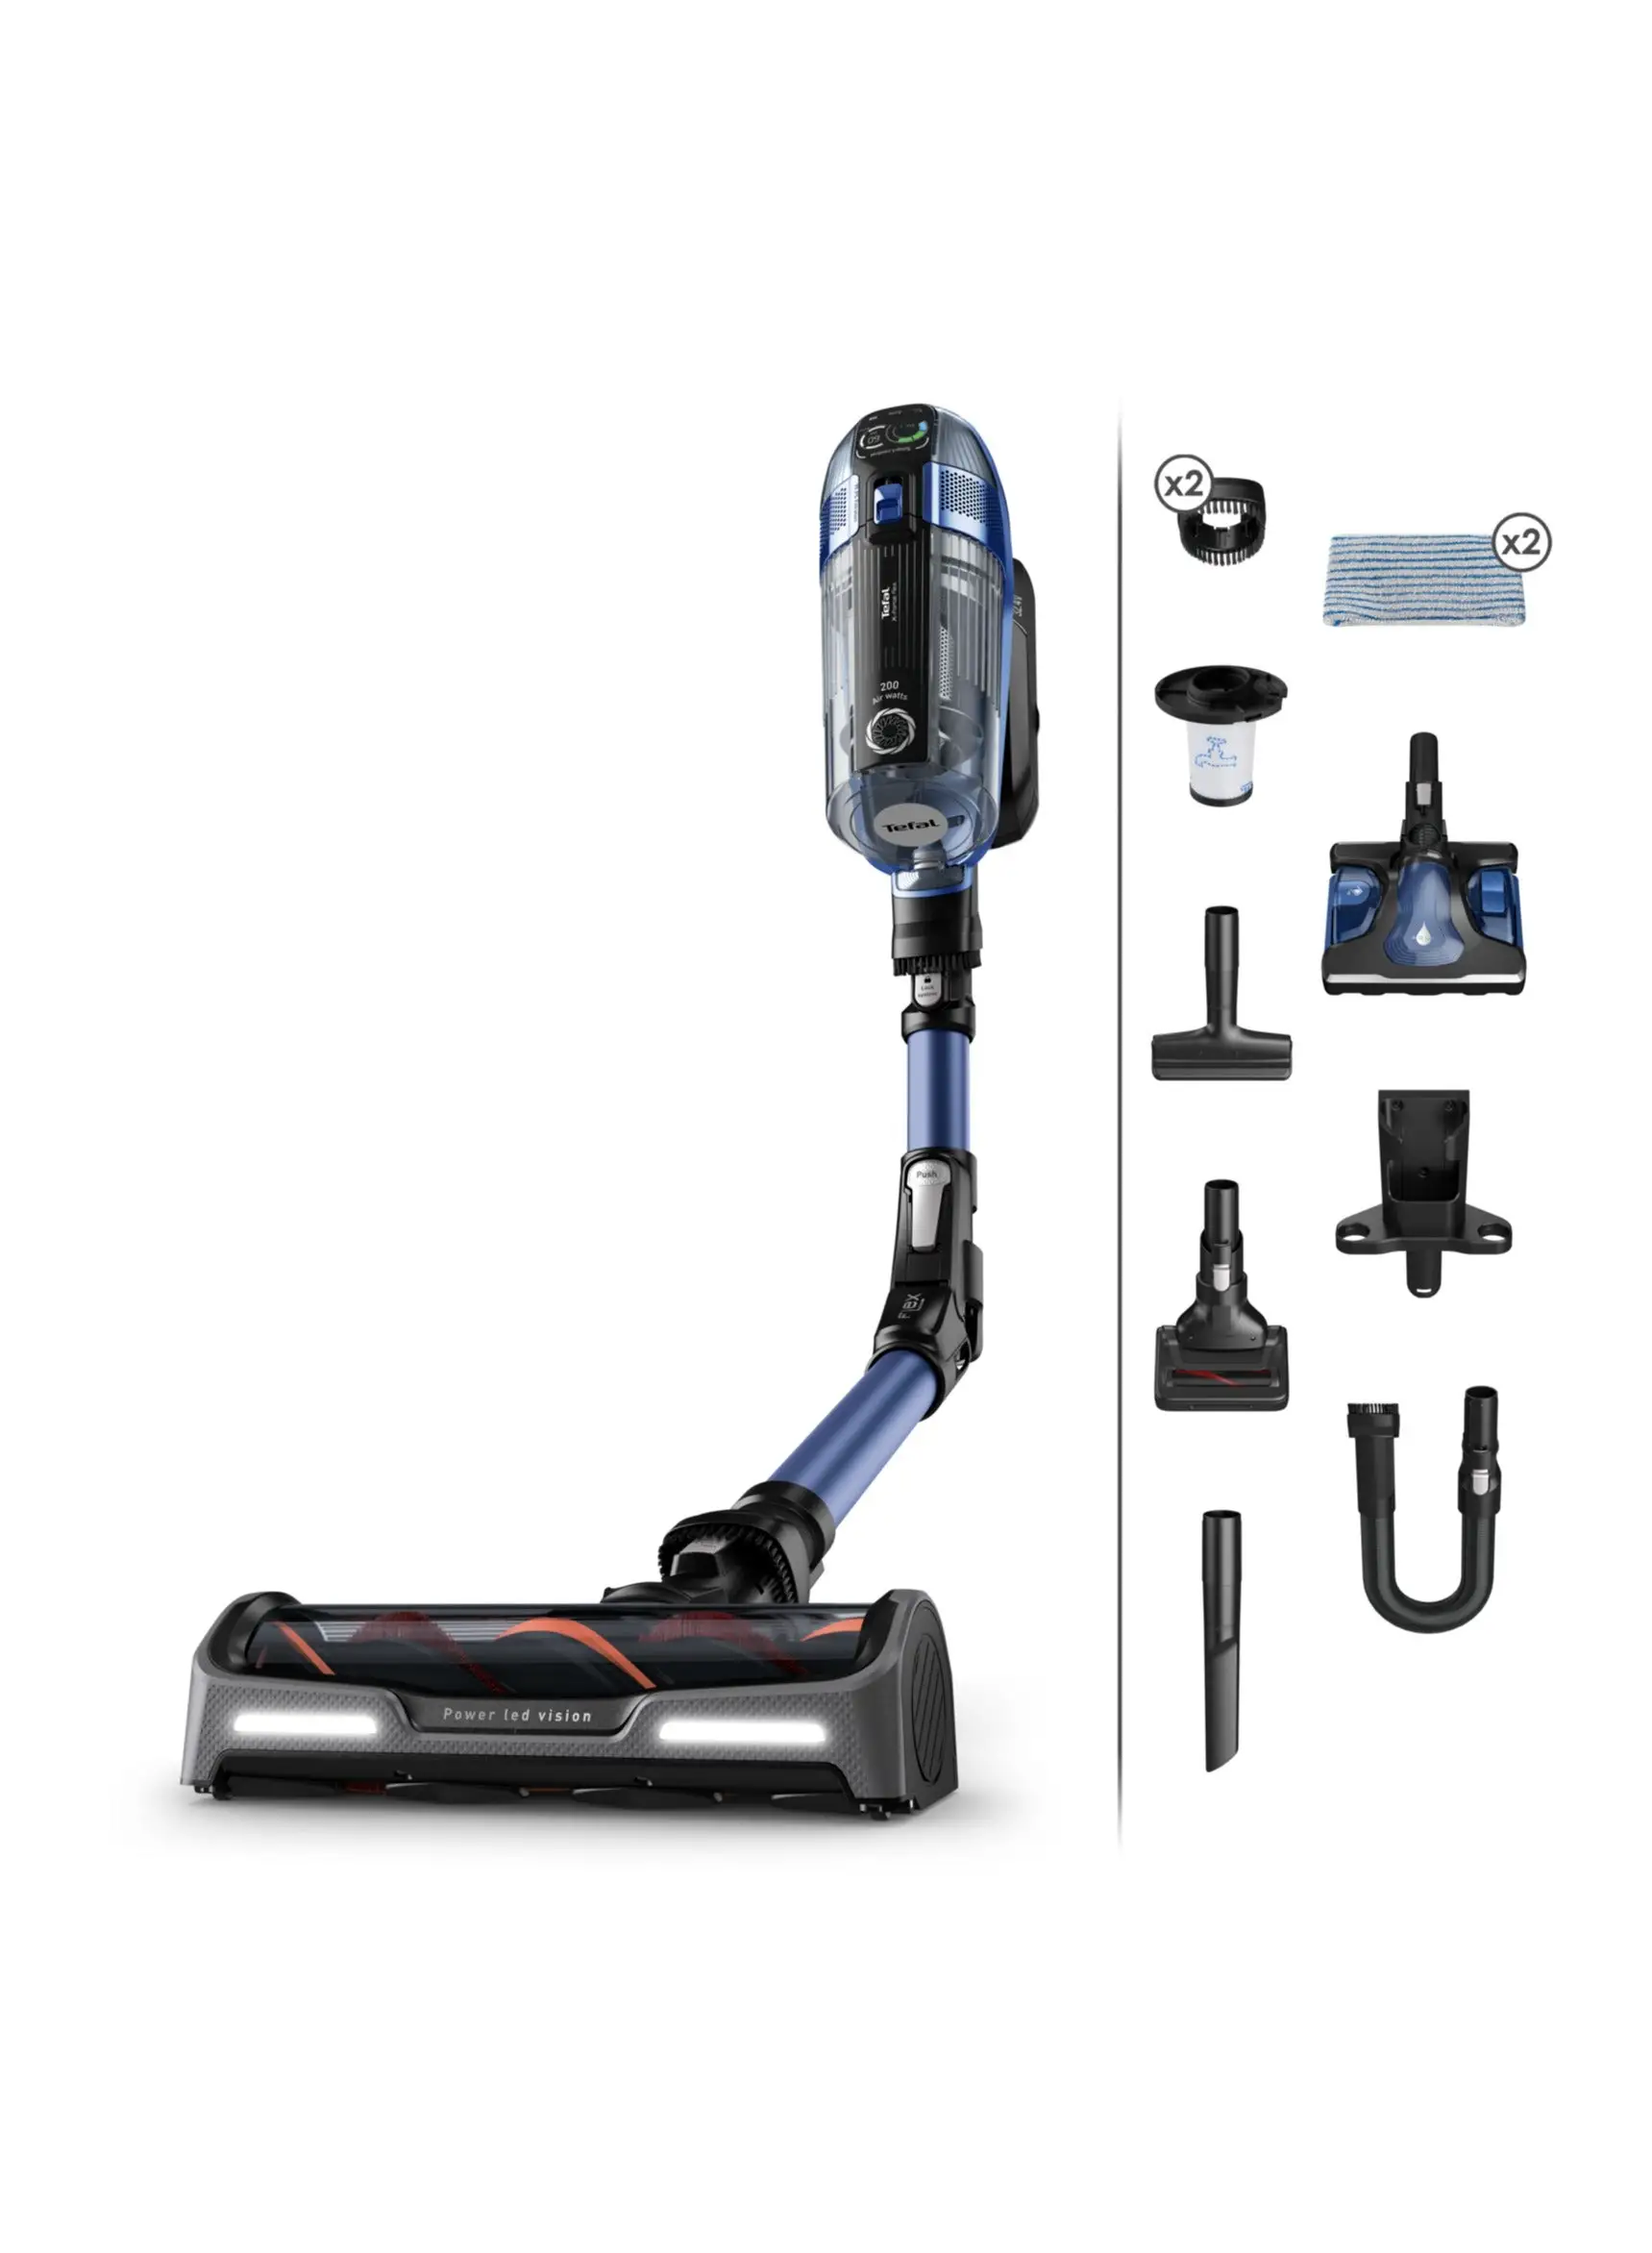 Tefal Vacuum Cleaner | X-Force Flex 12.60  Vacuum Cleaner Cordless | Aqua Model | Long-Lasting Battery Up to 45 minutes | 2-in-1 Mopping and Vacuuming | Flex Tube System | 2 Years Warranty 150 W TY98C0HO Blue